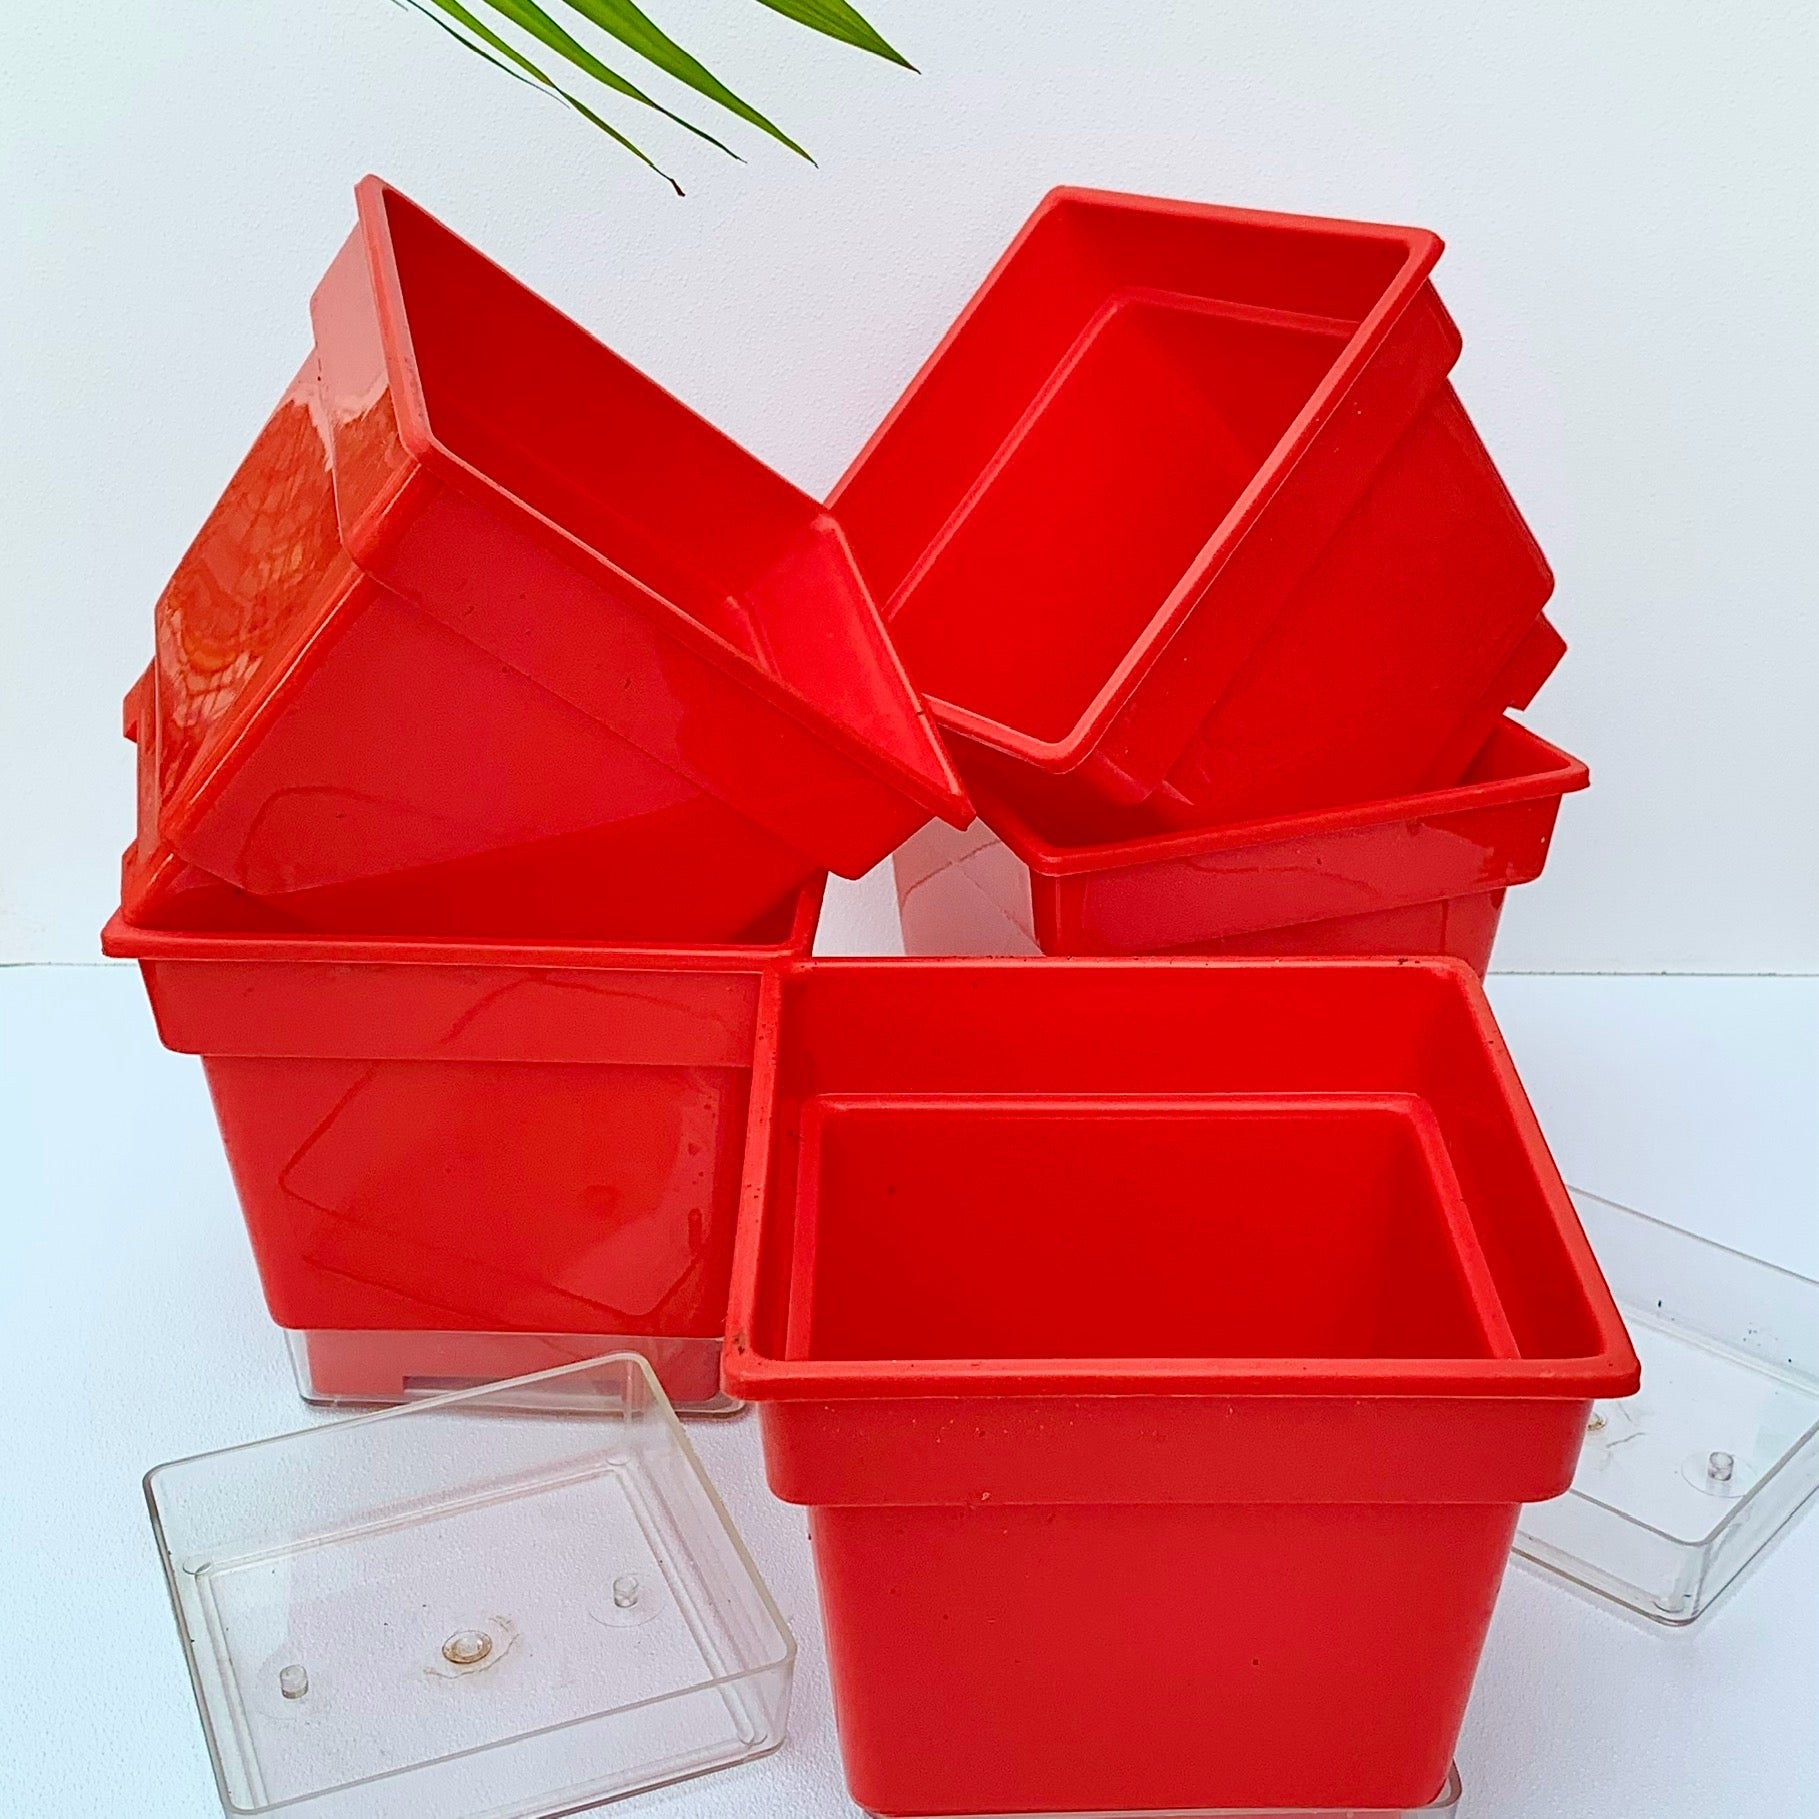 Flower pots - decorative planters made from plastic in vibrant colors. - The Plant Shop